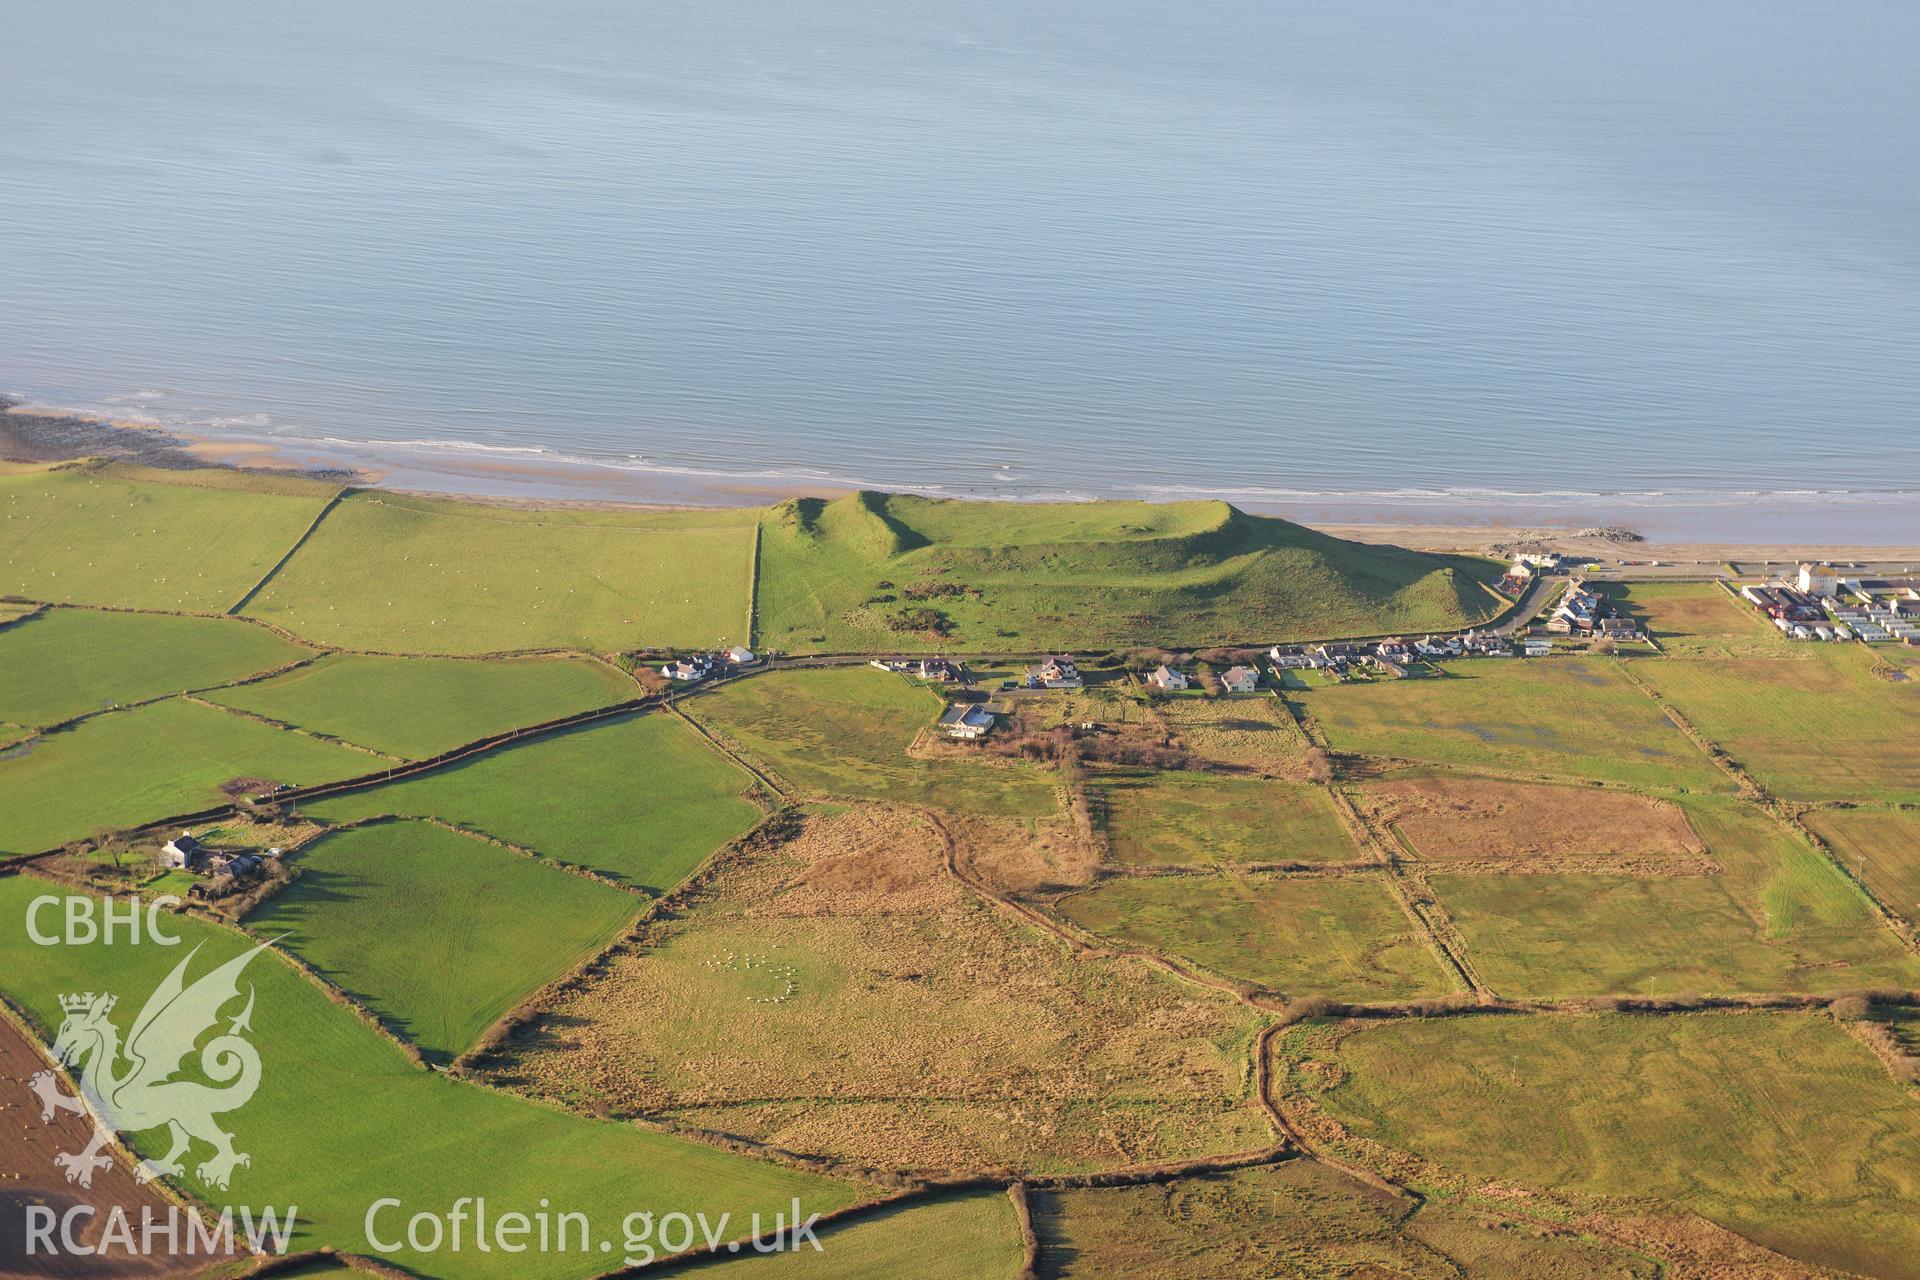 RCAHMW colour oblique photograph of Dinas Dinlle hillfort. Taken by Toby Driver on 10/12/2012.